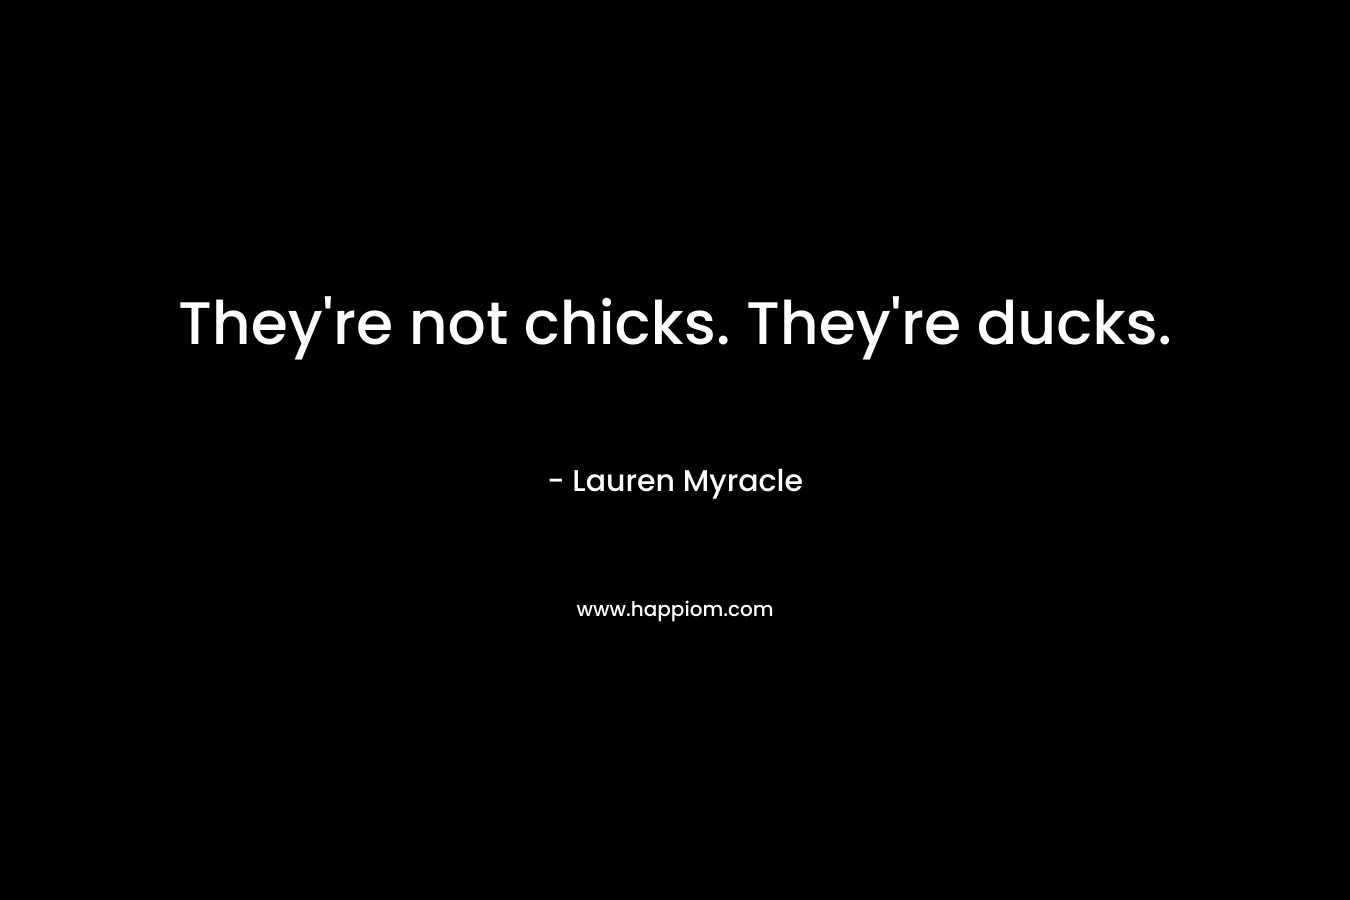 They’re not chicks. They’re ducks. – Lauren Myracle